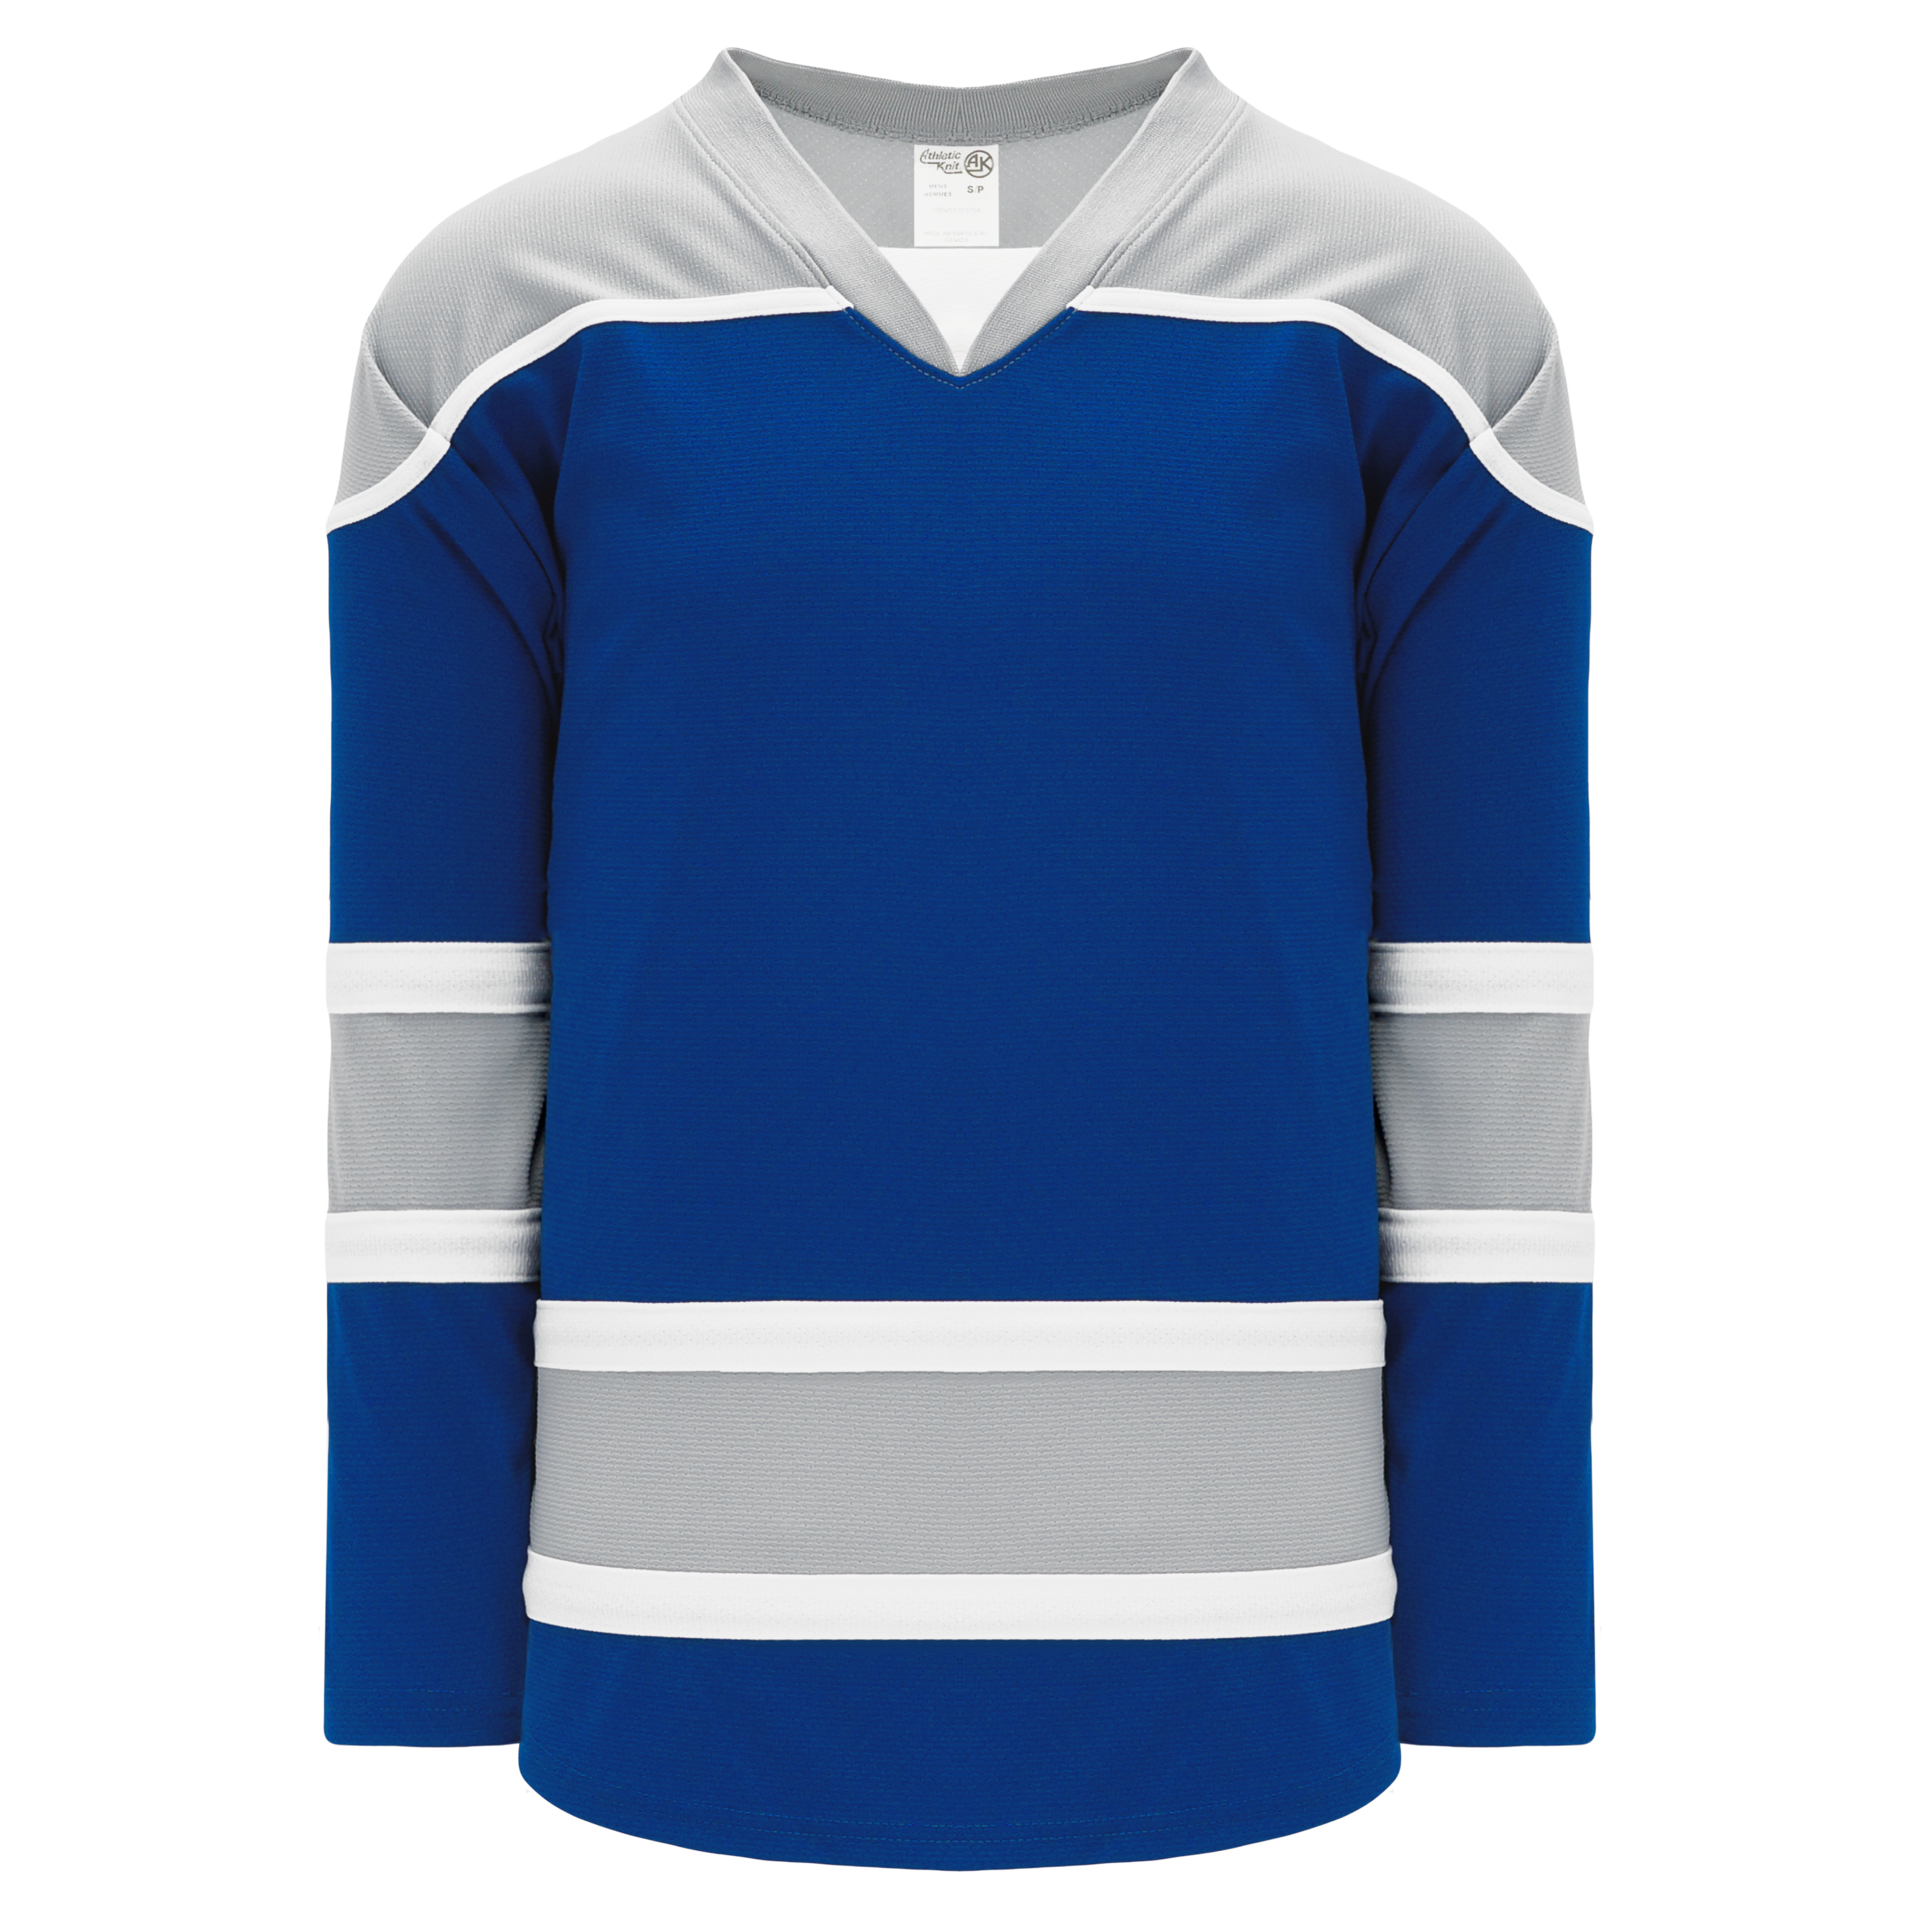 Athletic Knit (AK) H6500A-347 Adult Kelly Green/White/Royal Blue League Hockey Jersey Large